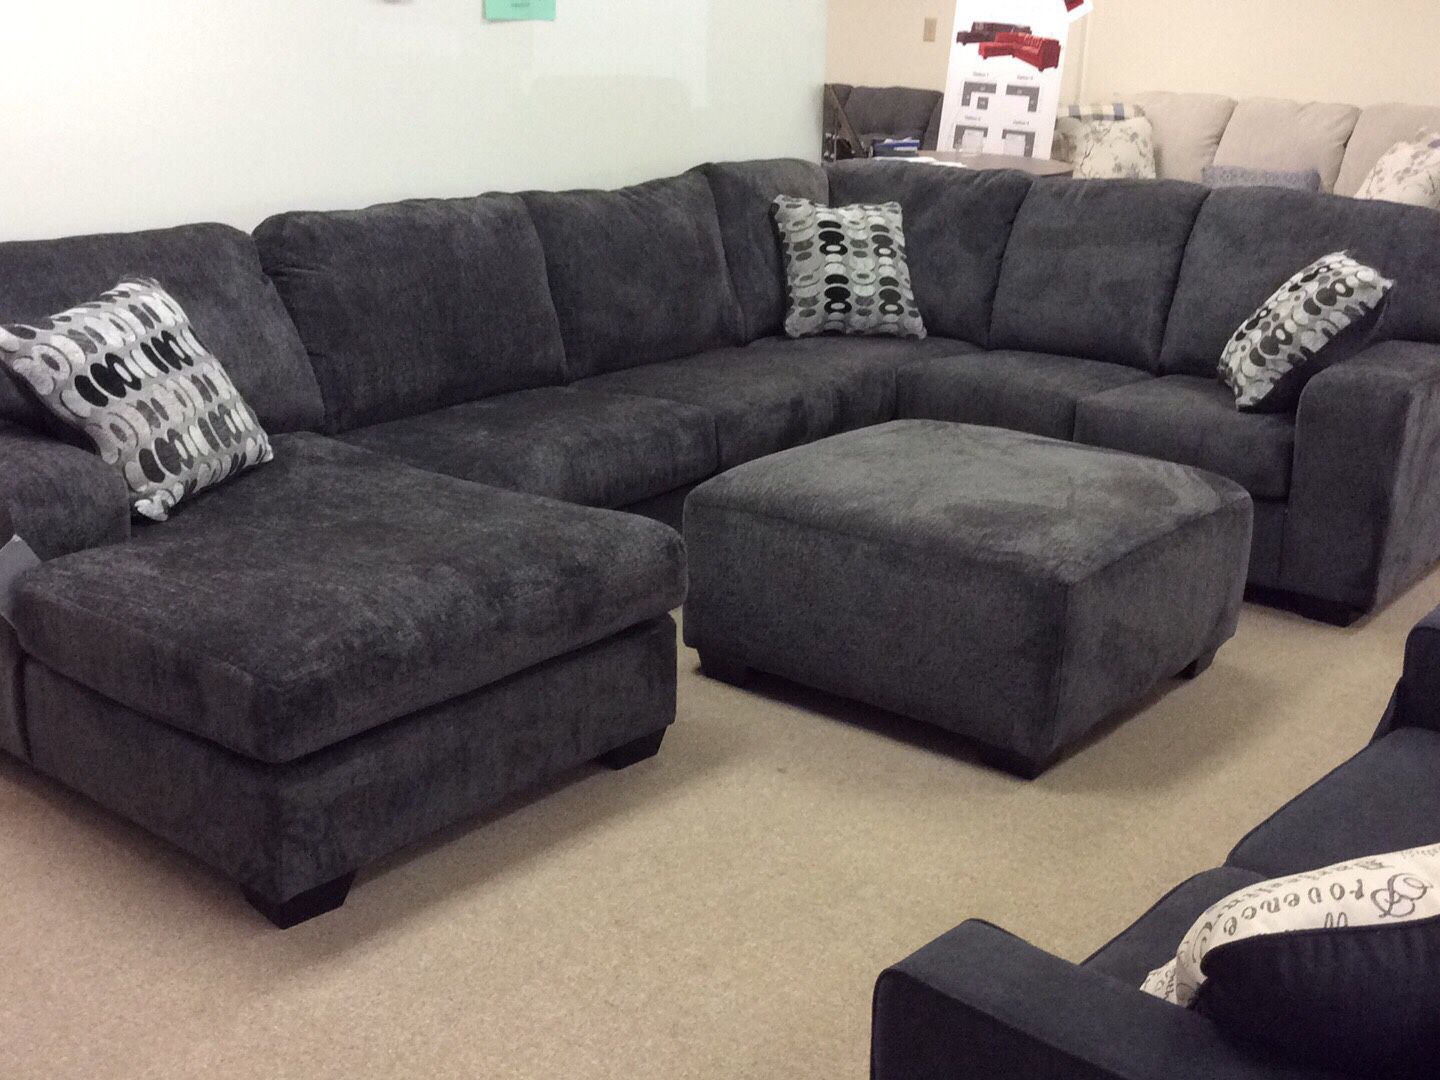 3 piece sectional available at a wholesale price!!!